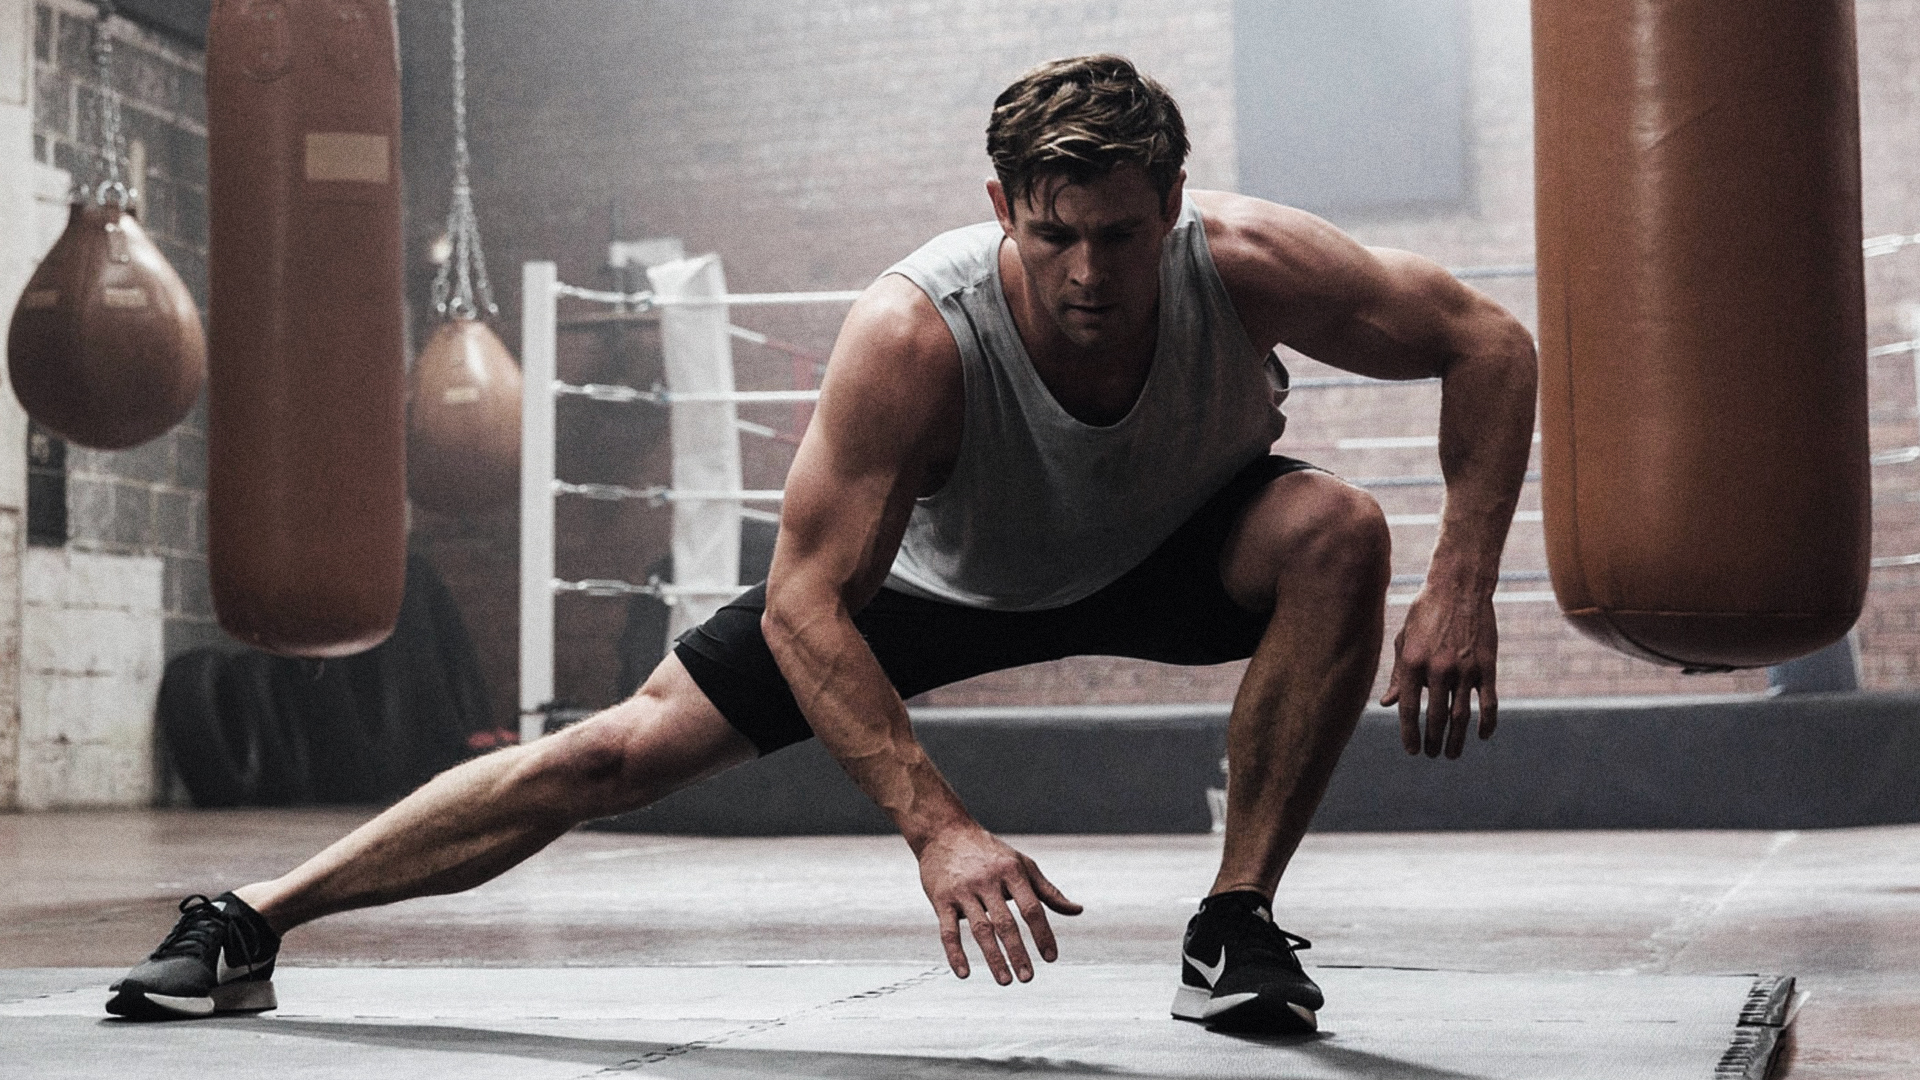 Get As Fit As Thor With These Three Excellent Workout Apps.